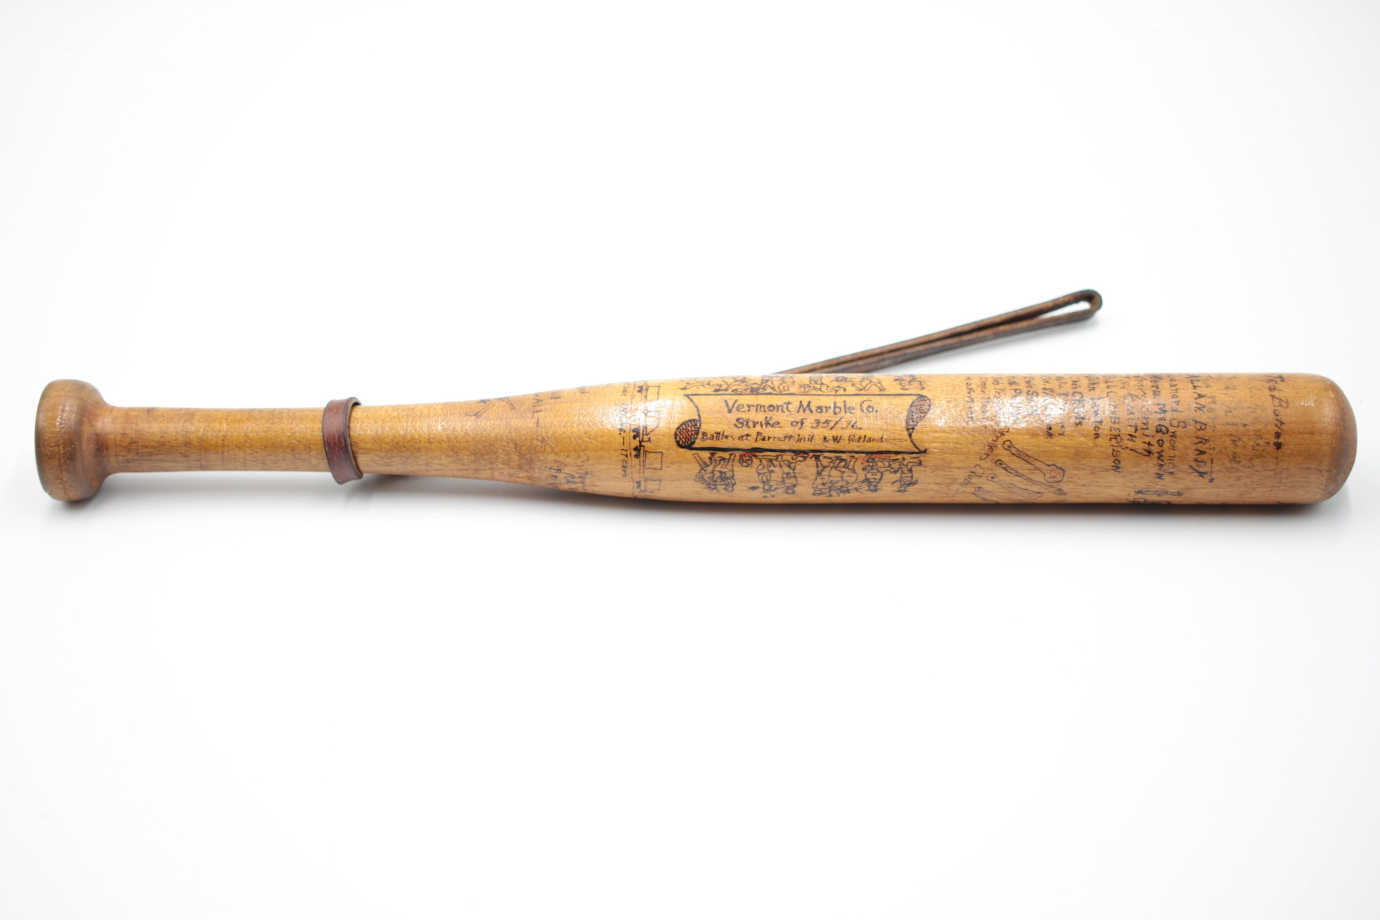 Owned and embellished by Harry L. Hall (1878-1956), night watchman for Vermont Marble Company during the 1935-1936 strike. He decorated the nightstick with events from the strike. This object was cataloged and made accessible online as part of both the CARES and SHARP grants. Image courtesy of the Vermont Historical Center.